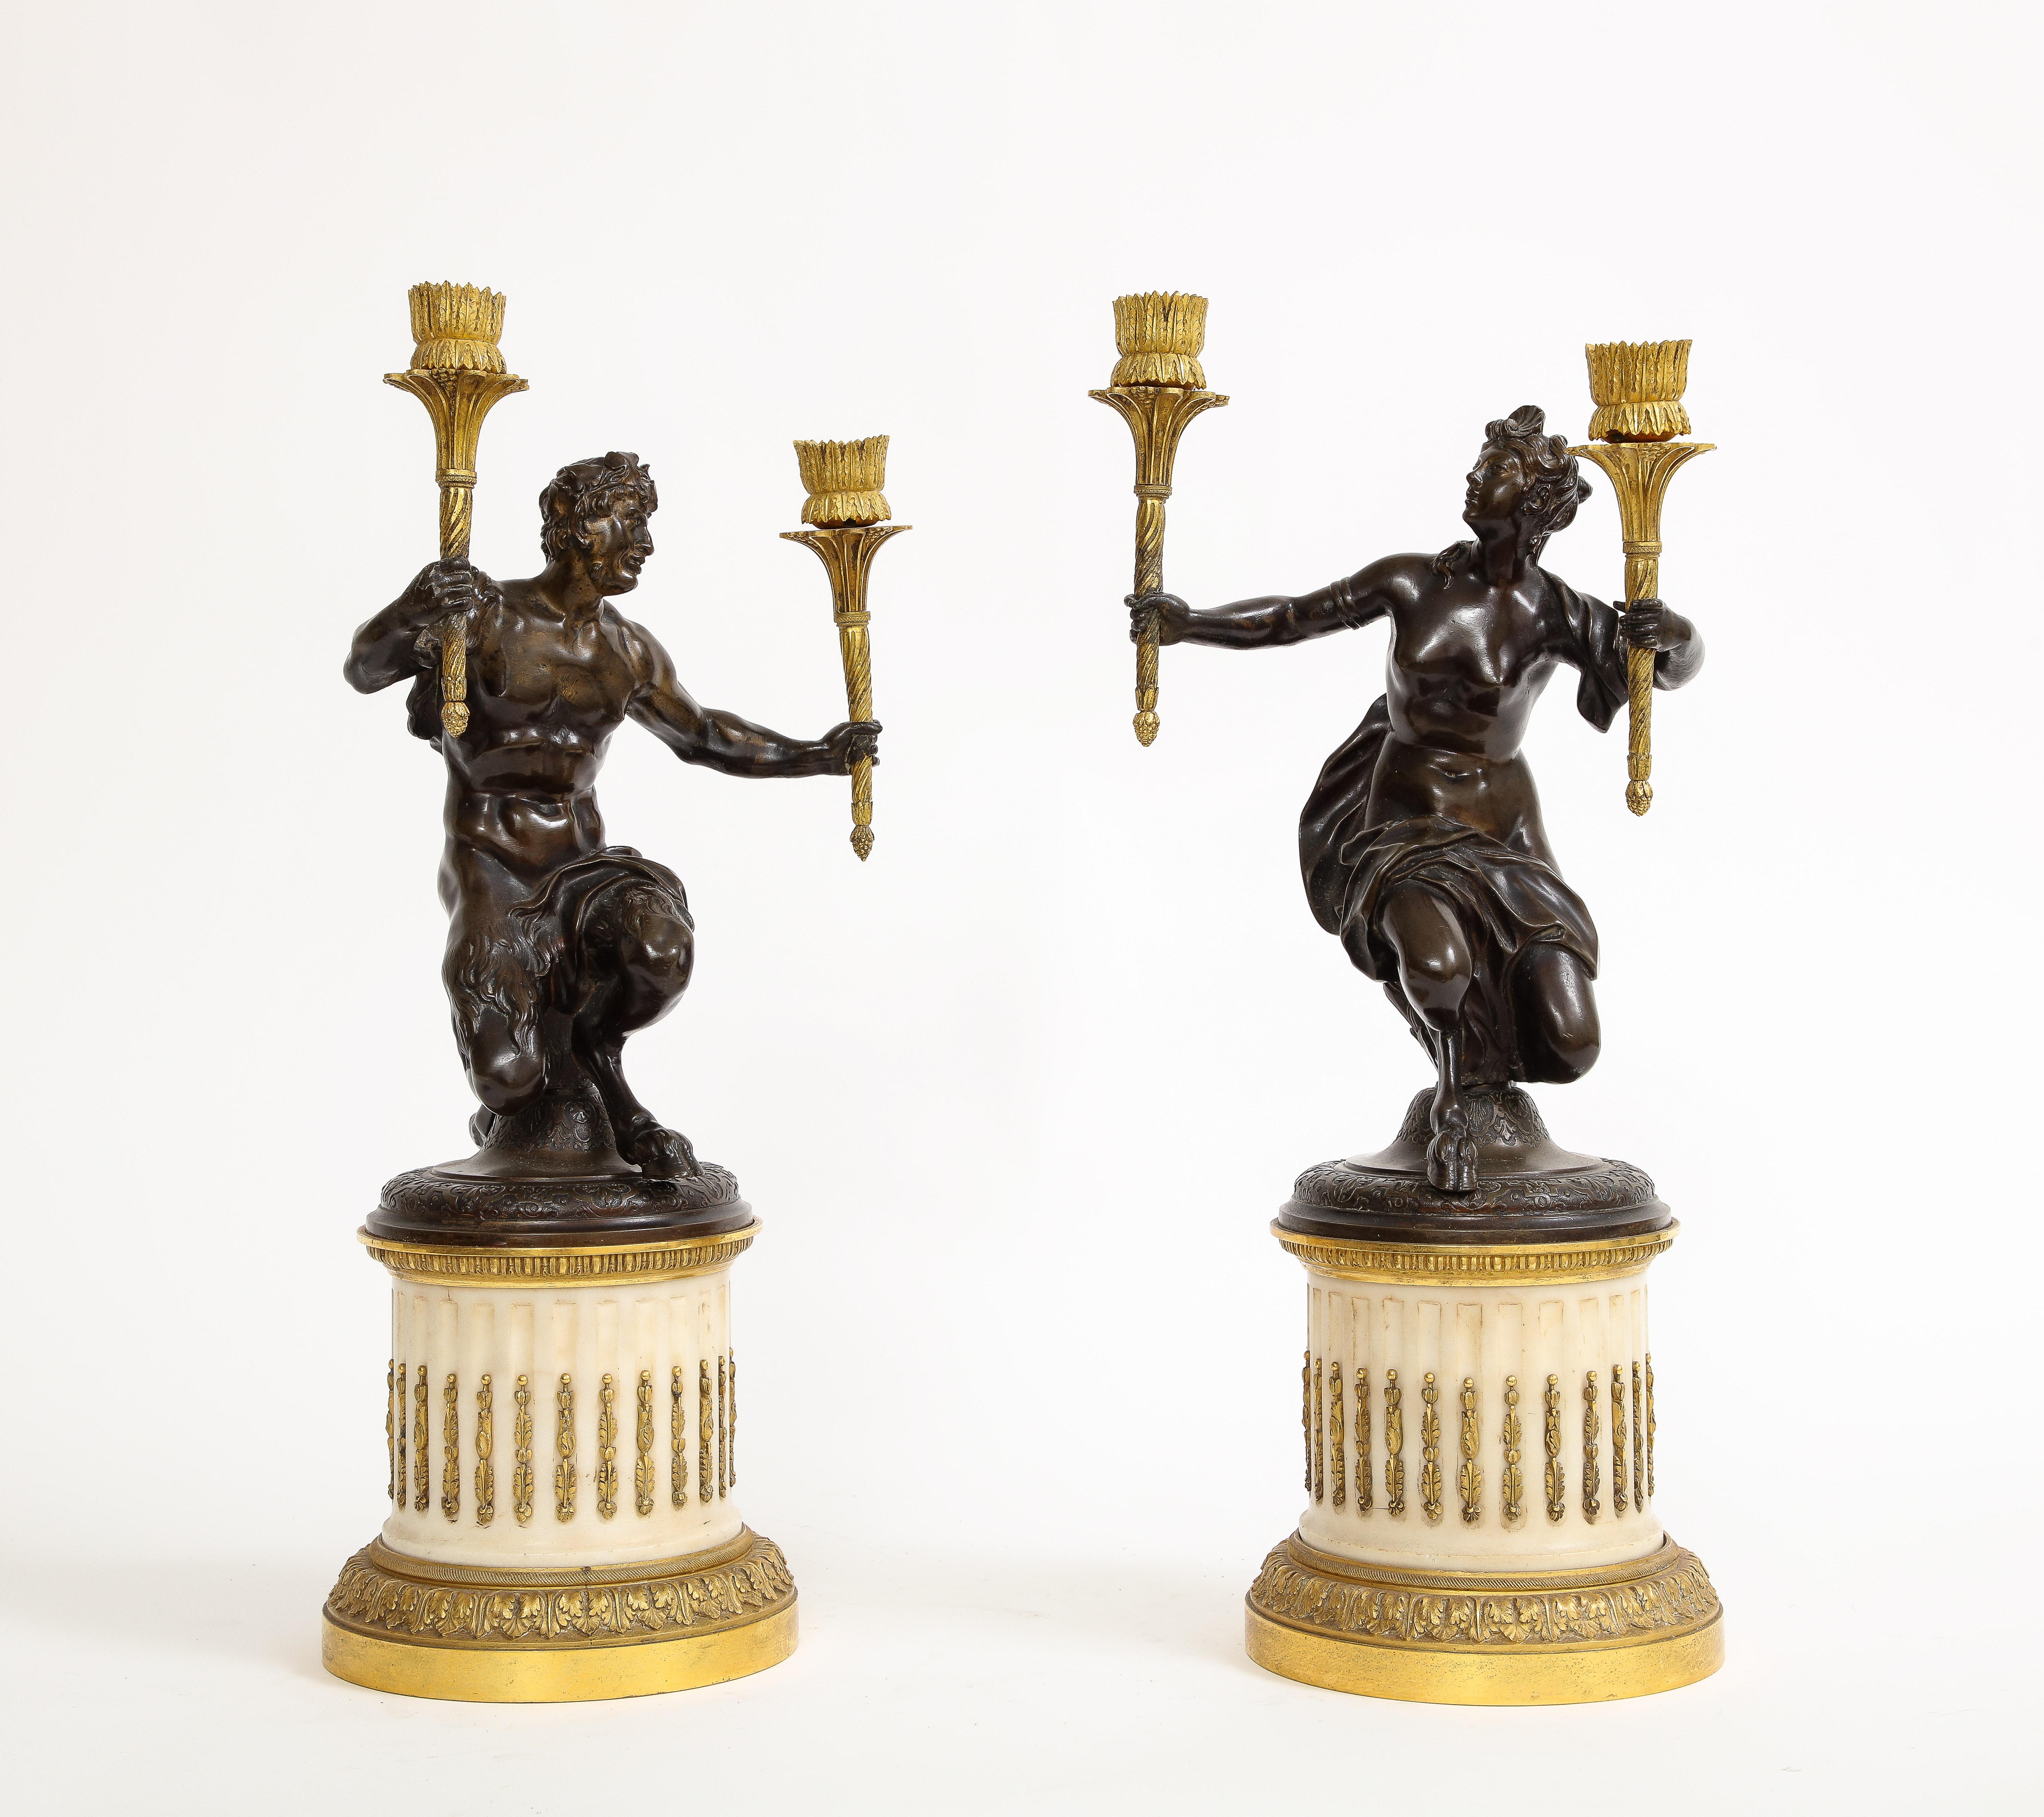 A n Exquisite Pair of Louis XVI Period Figural Patinated and Ormolu Candelabrum on Marble Plinths.  These remarkable candelabra epitomize the artistic splendor of the Louis XVI period. Inspired by the lively scenes of Bacchanalian revelry, the